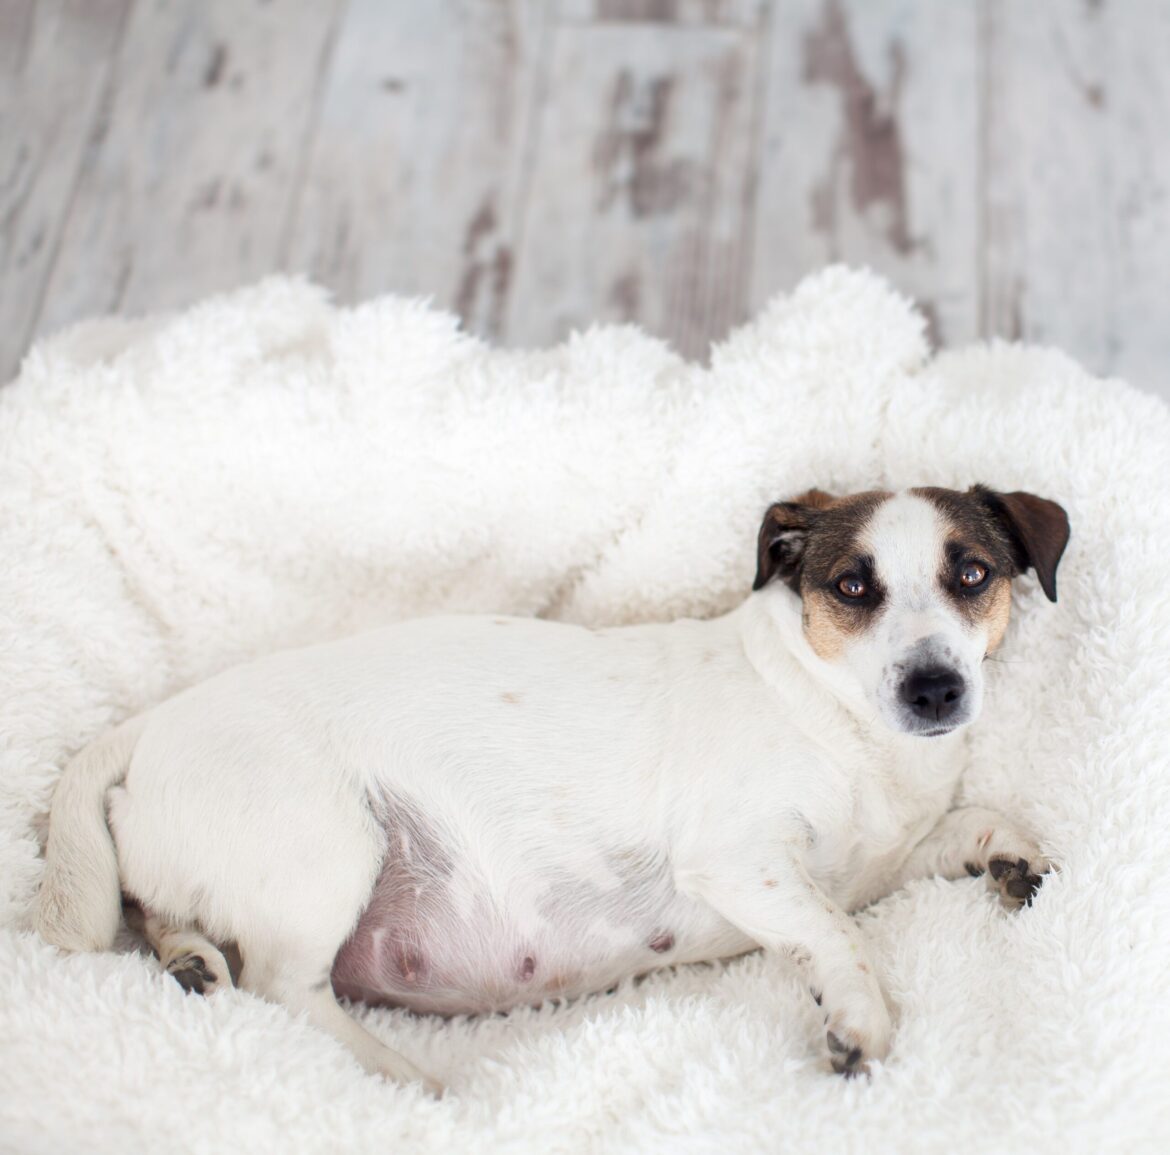 Are There Prenatal Vitamins for Dogs?